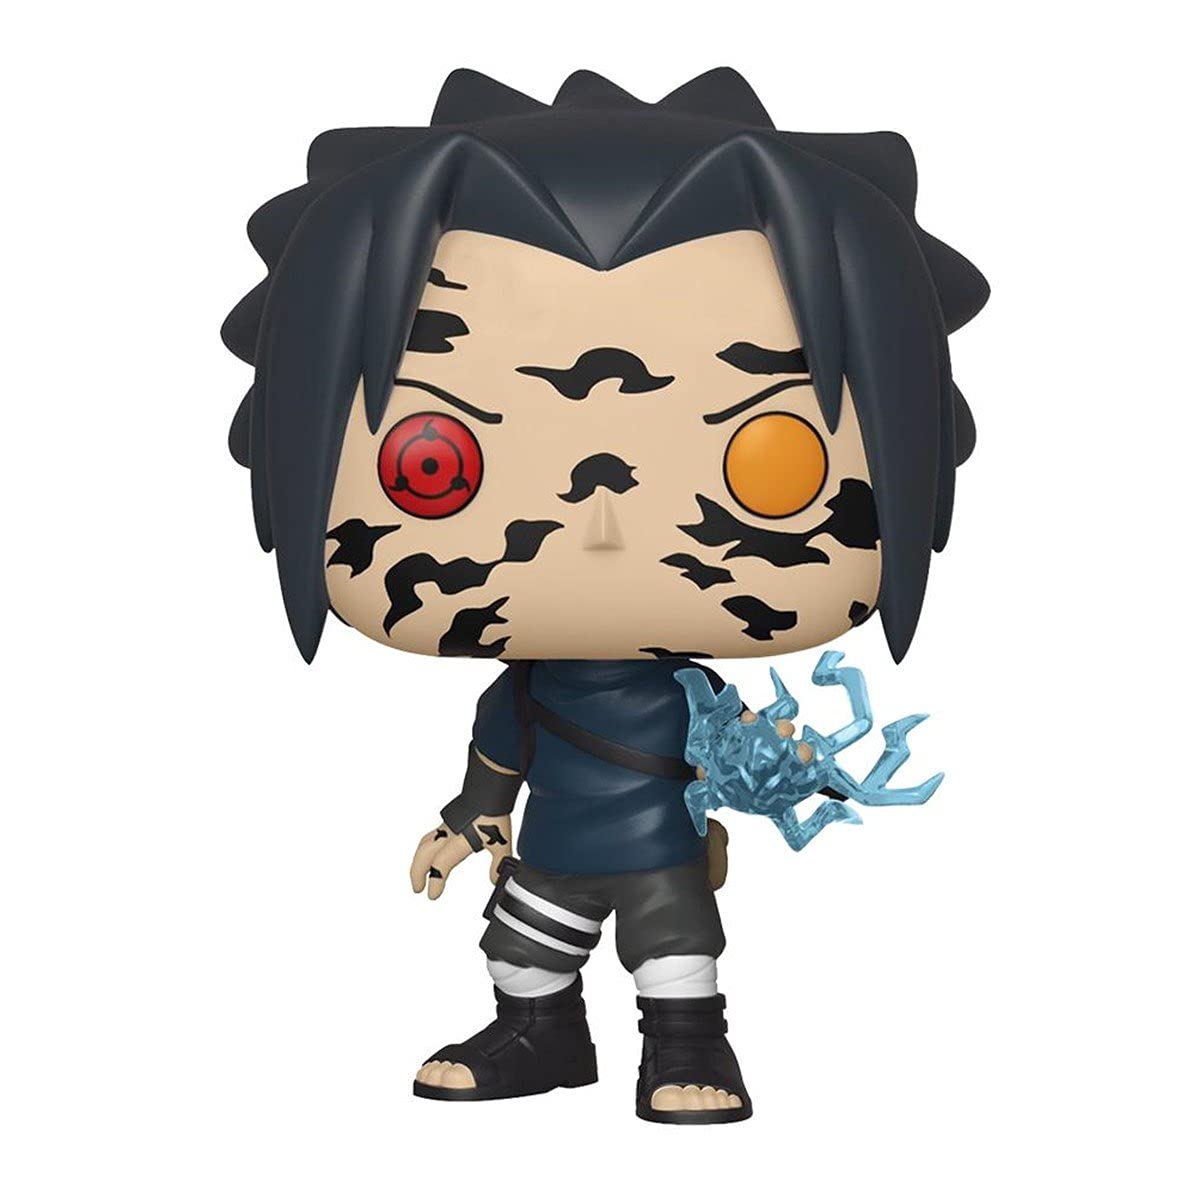 Funko Pop! Animation: Naruto - Sasuke Uchiha with Scars - Naruto Shippuden - Vinyl Collectible Figure - Gift Idea - Official Merchandise - Toy for Children and Adults - Anime Fans